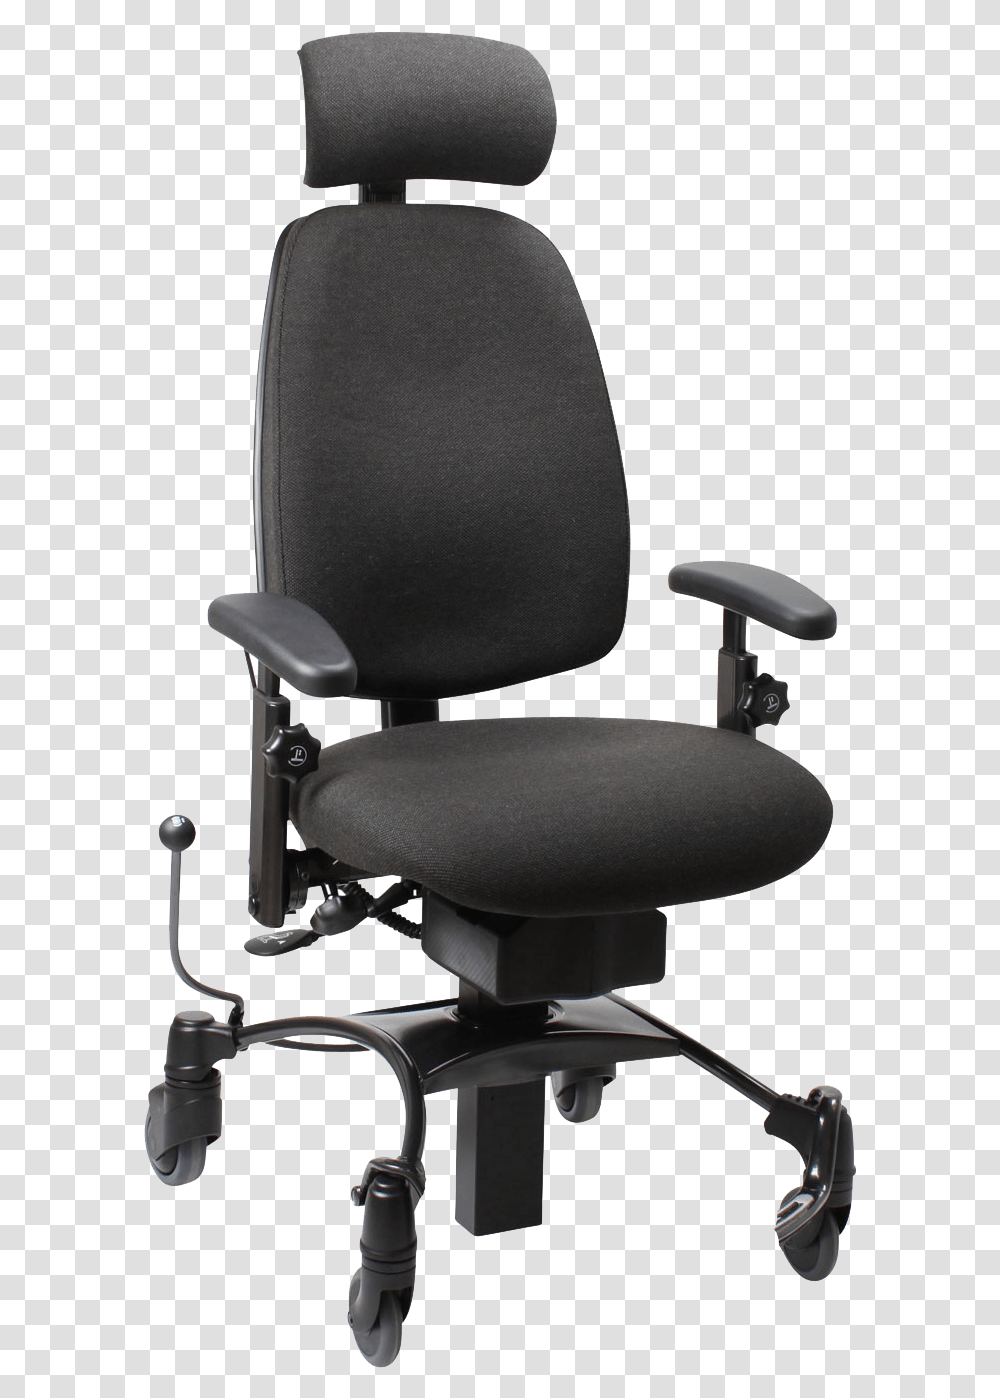 Vela Tango 510el T3 Right2 Office Chairs With Brakes Uk, Furniture, Cushion, Headrest Transparent Png